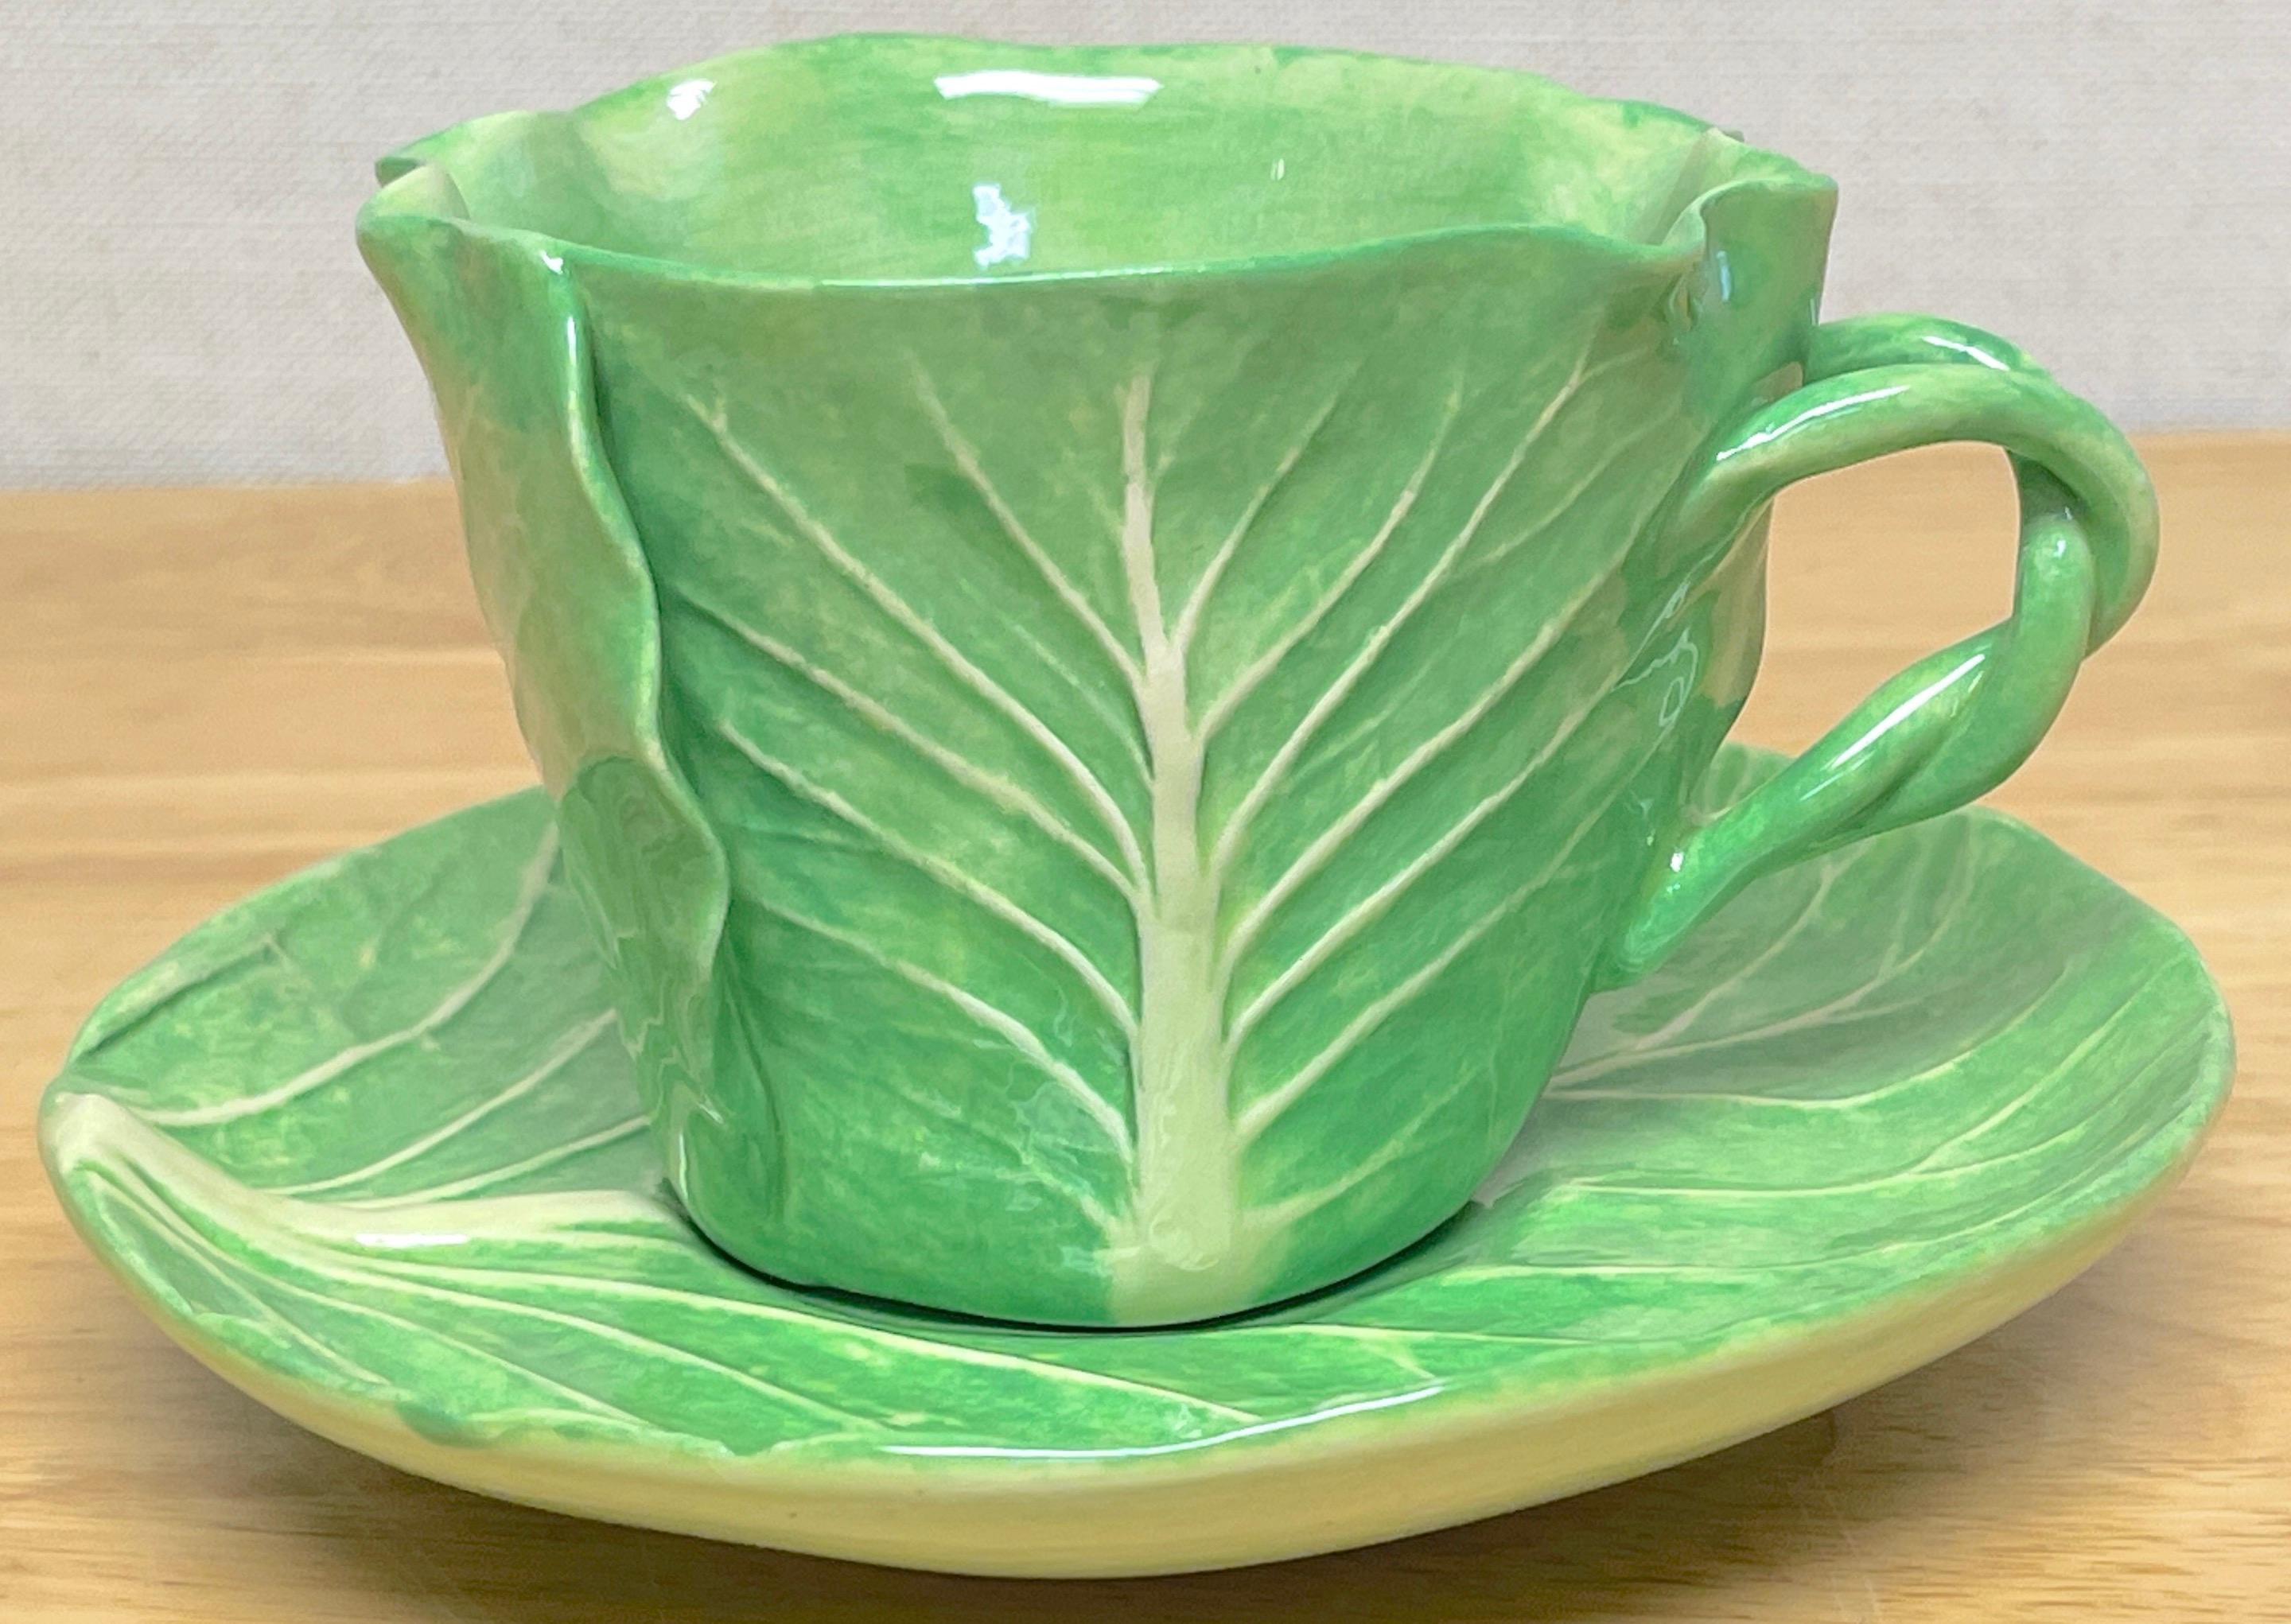 Pottery Dodie Thayer 'Jumbo' Lettuce Leaf Cup & Saucer, 5 Available, Sold Individually